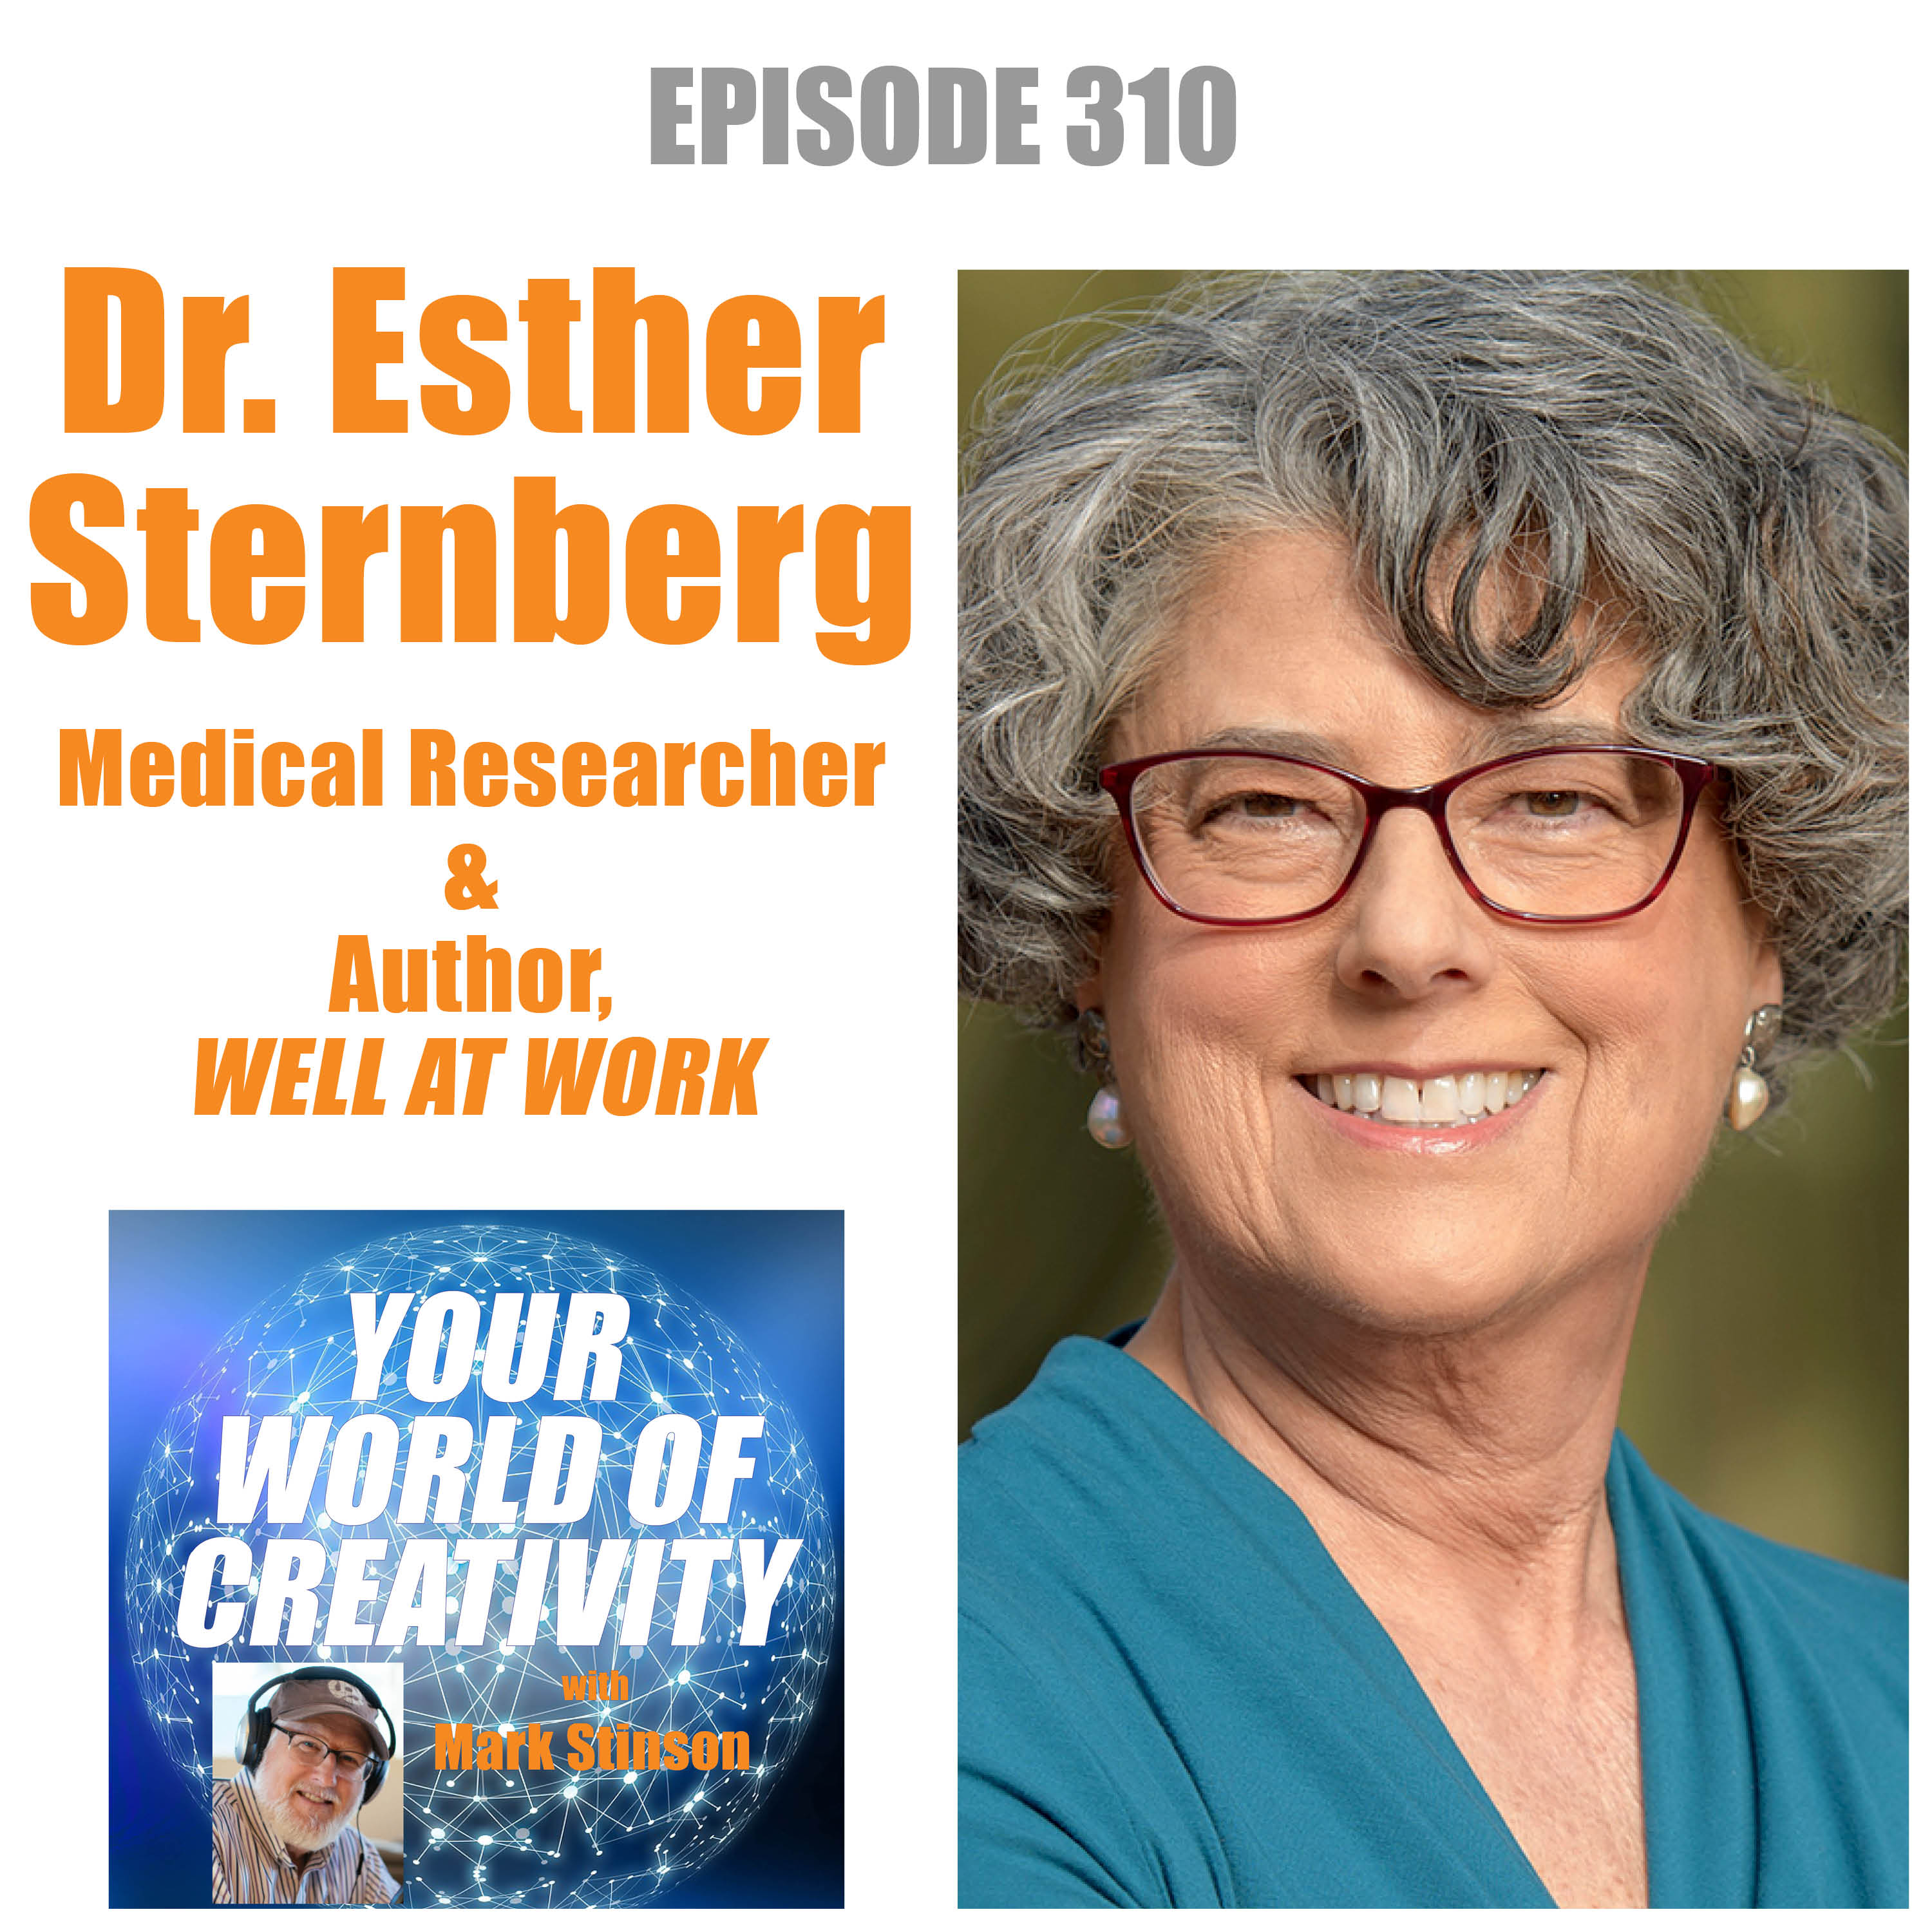 Dr. Esther Sternberg, Medical Researcher and Author of WELL AT WORK